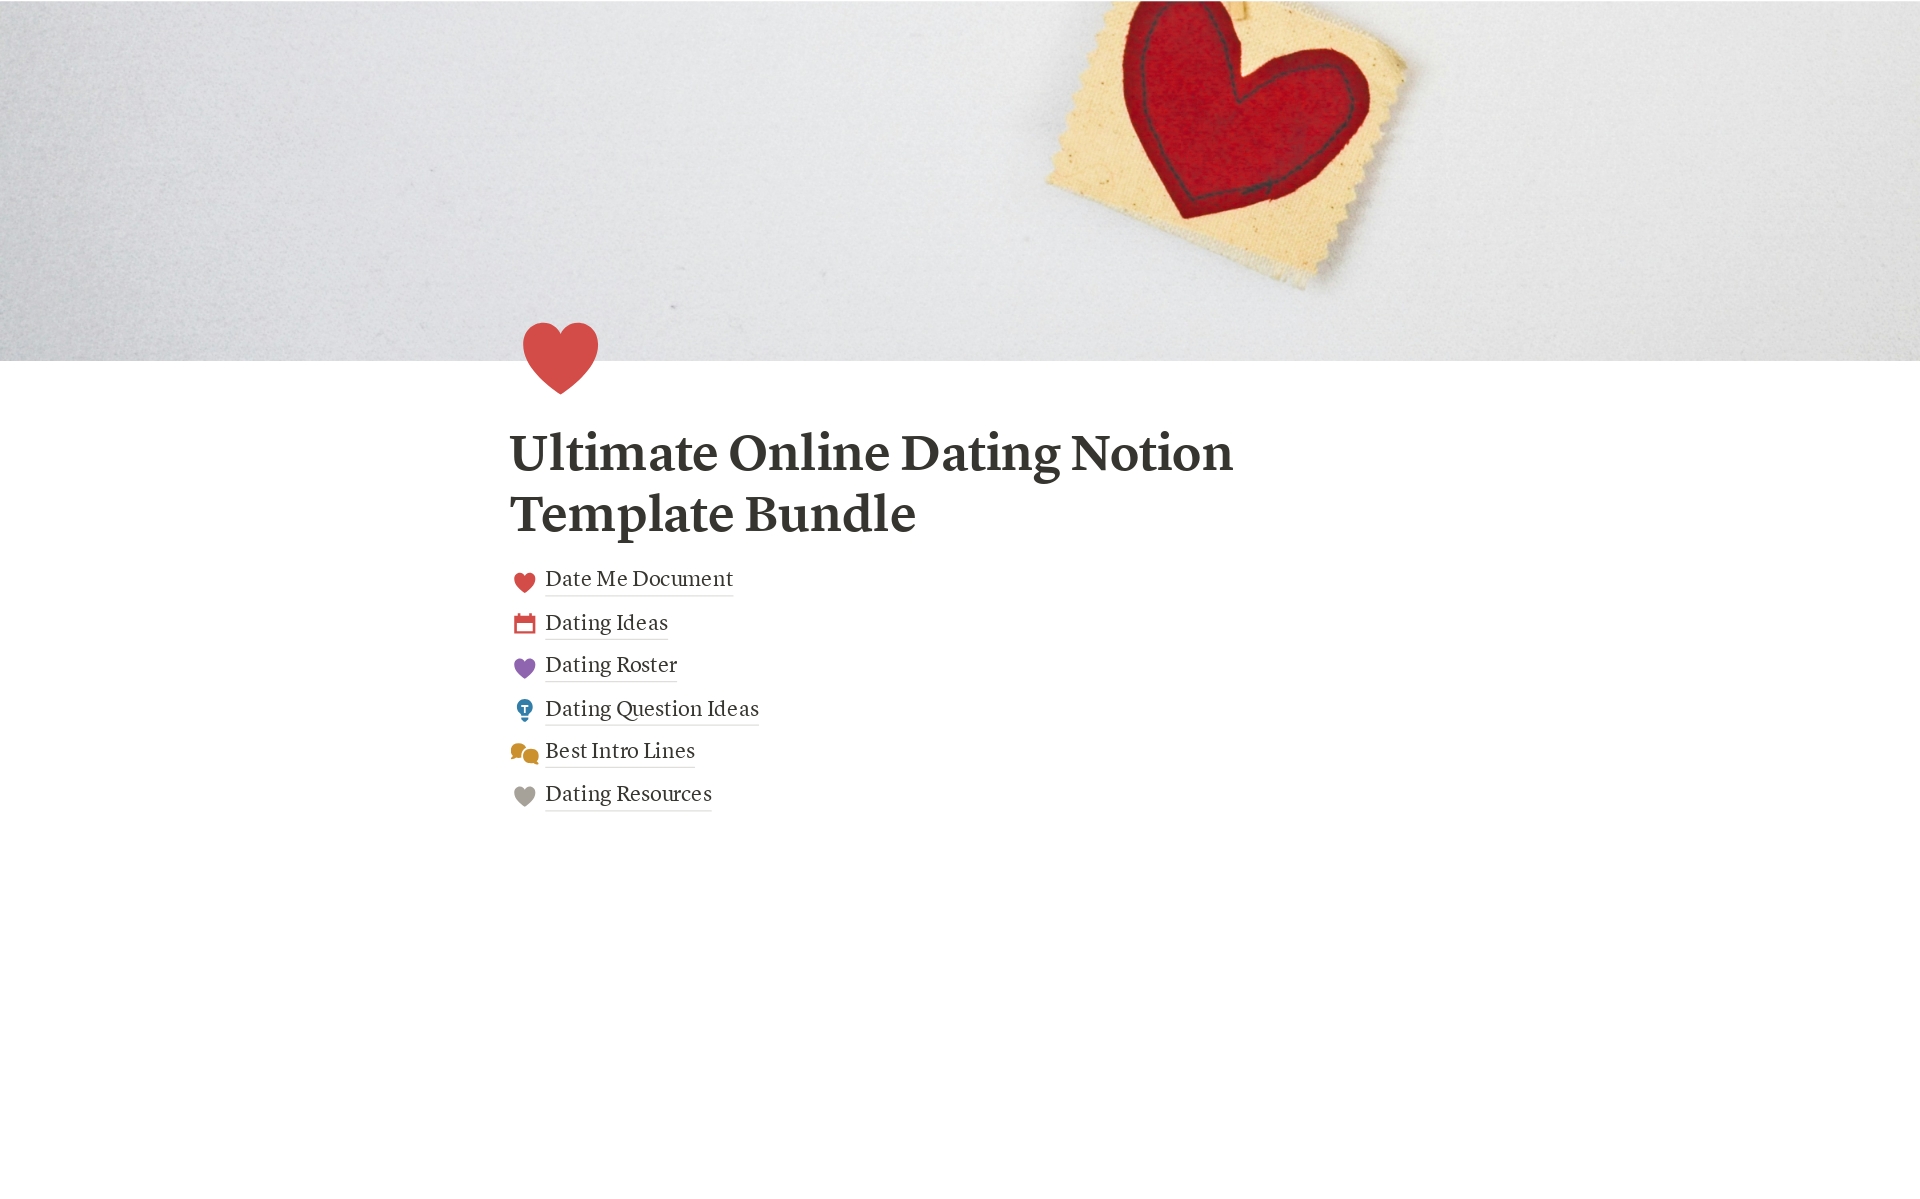 The Ultimate Online Dating Notion Template Bundle includes
📄 Date Me Document
💡 Dating Ideas
☑️ Dating Roster
❓ Dating Question Ideas
💬 Best Intro Lines
❤️ Dating Resources